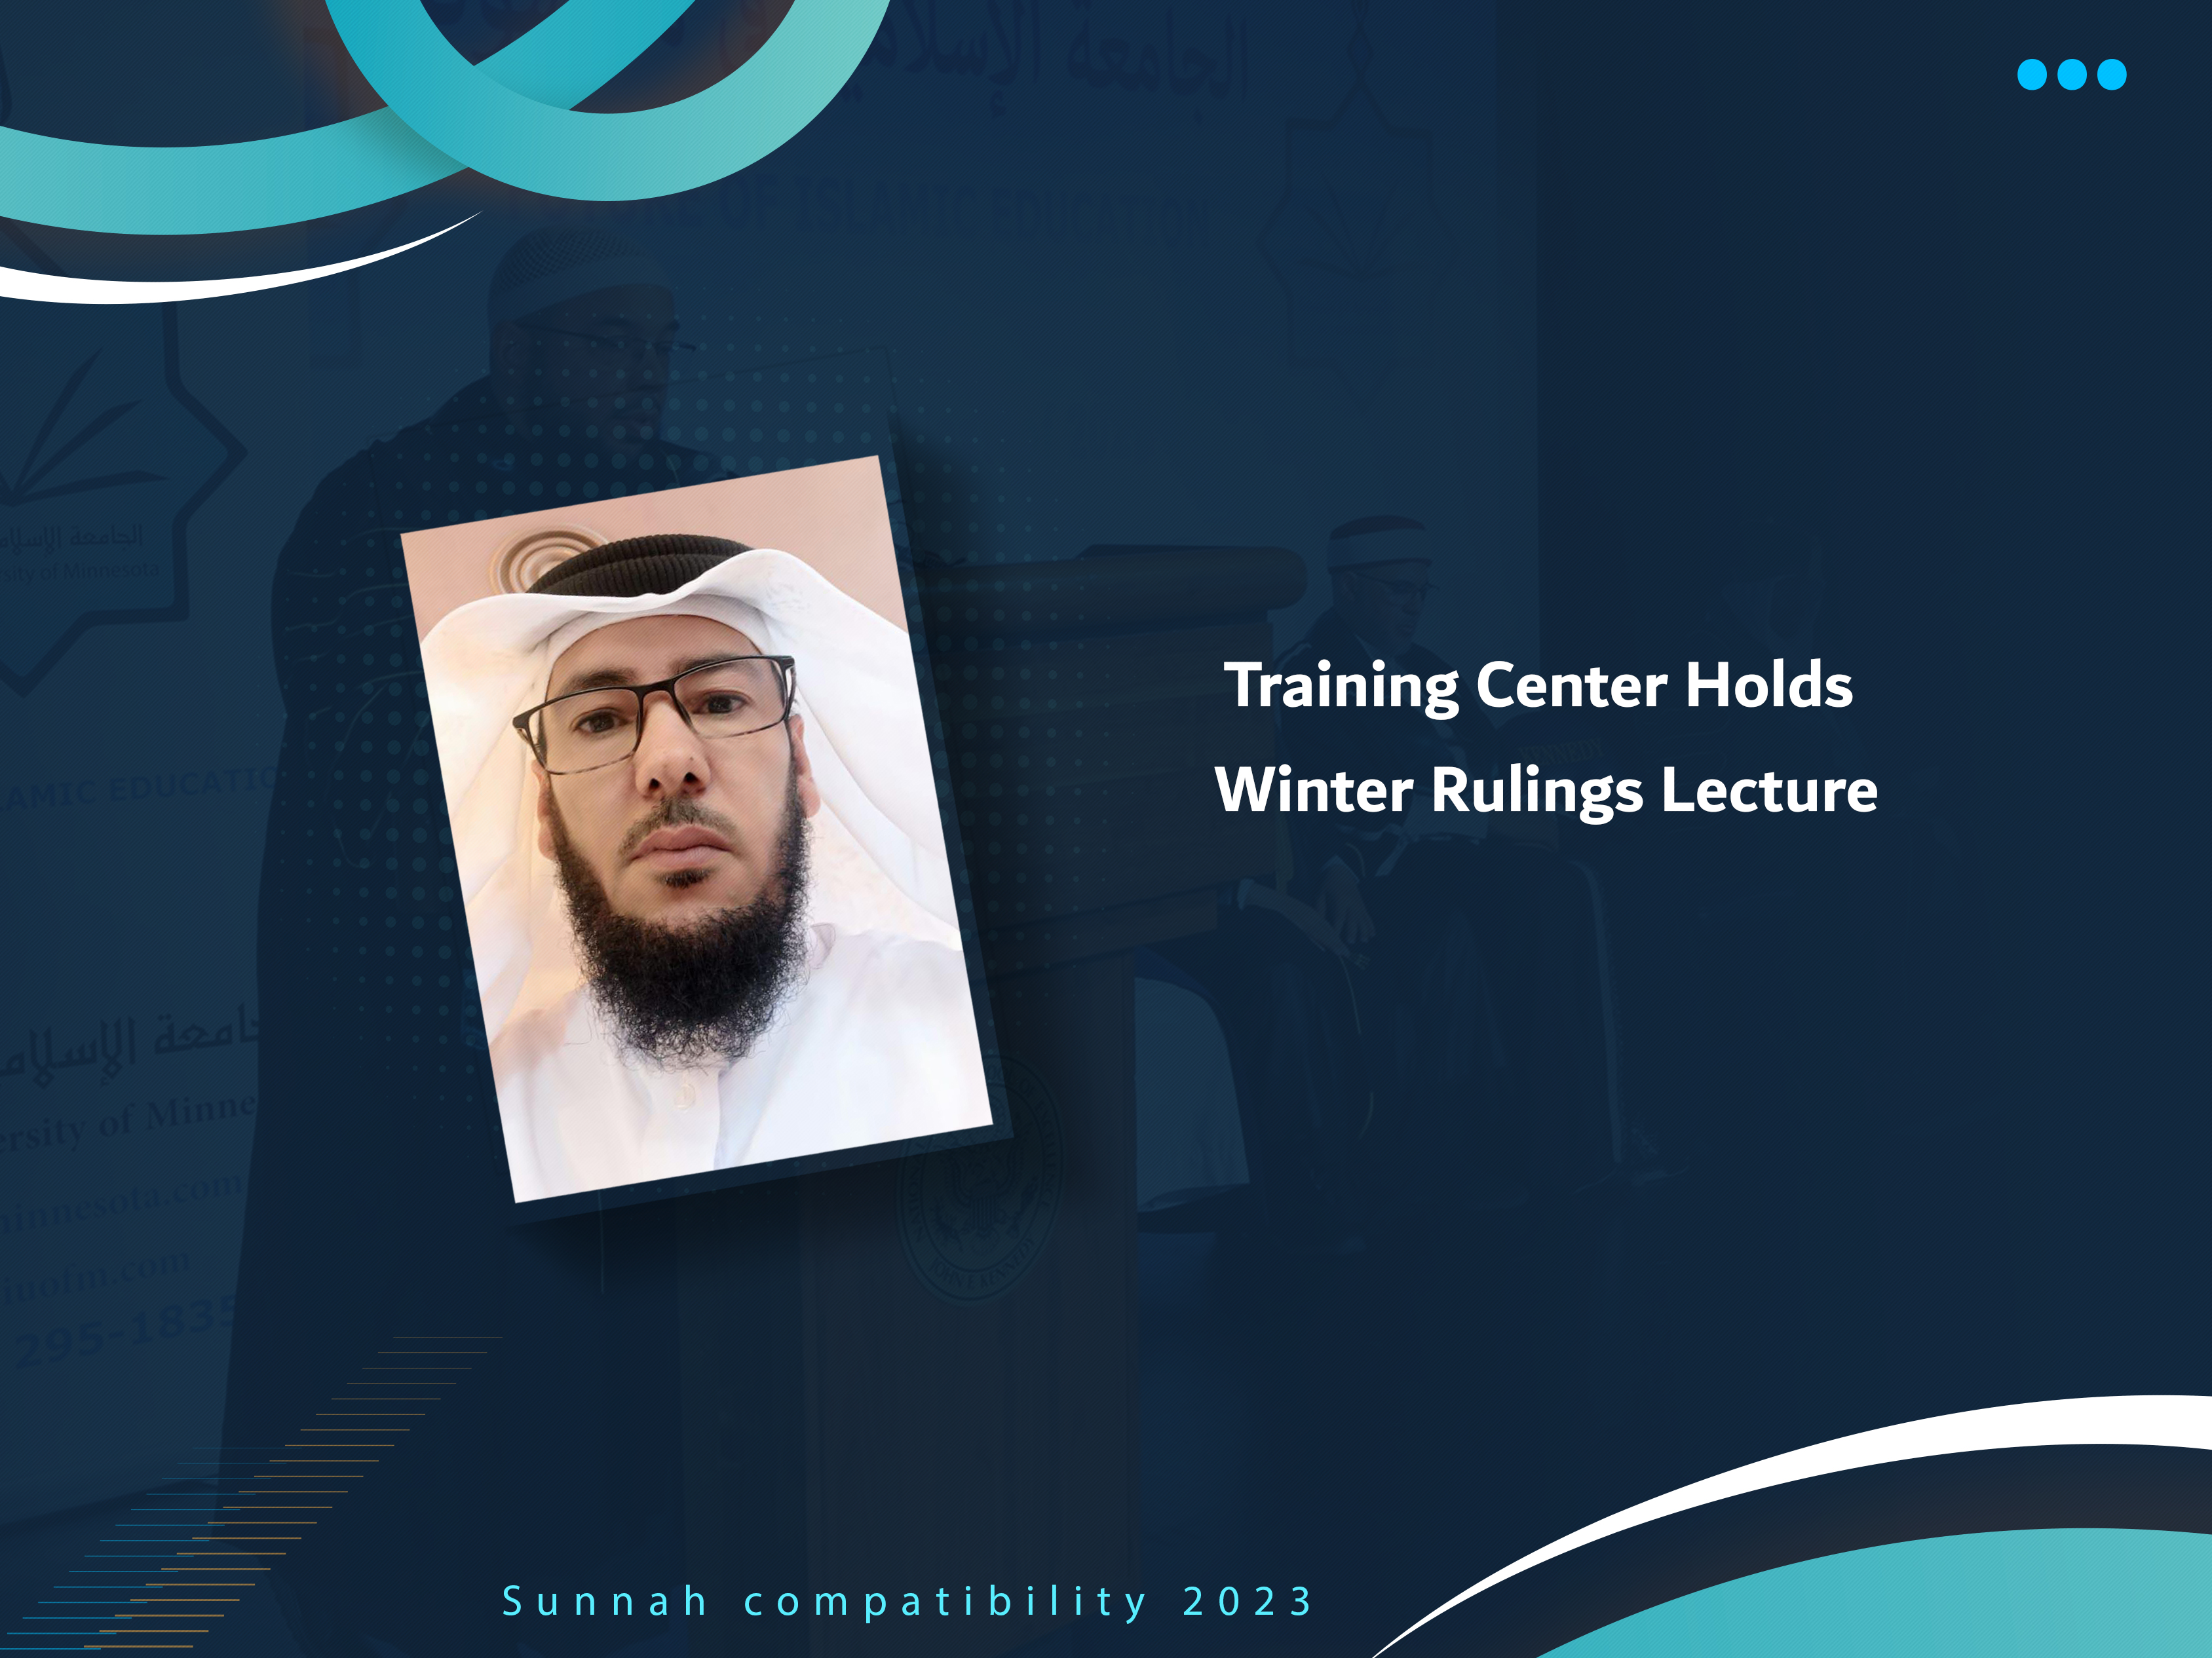 Training Center Holds Winter Rulings Lecture